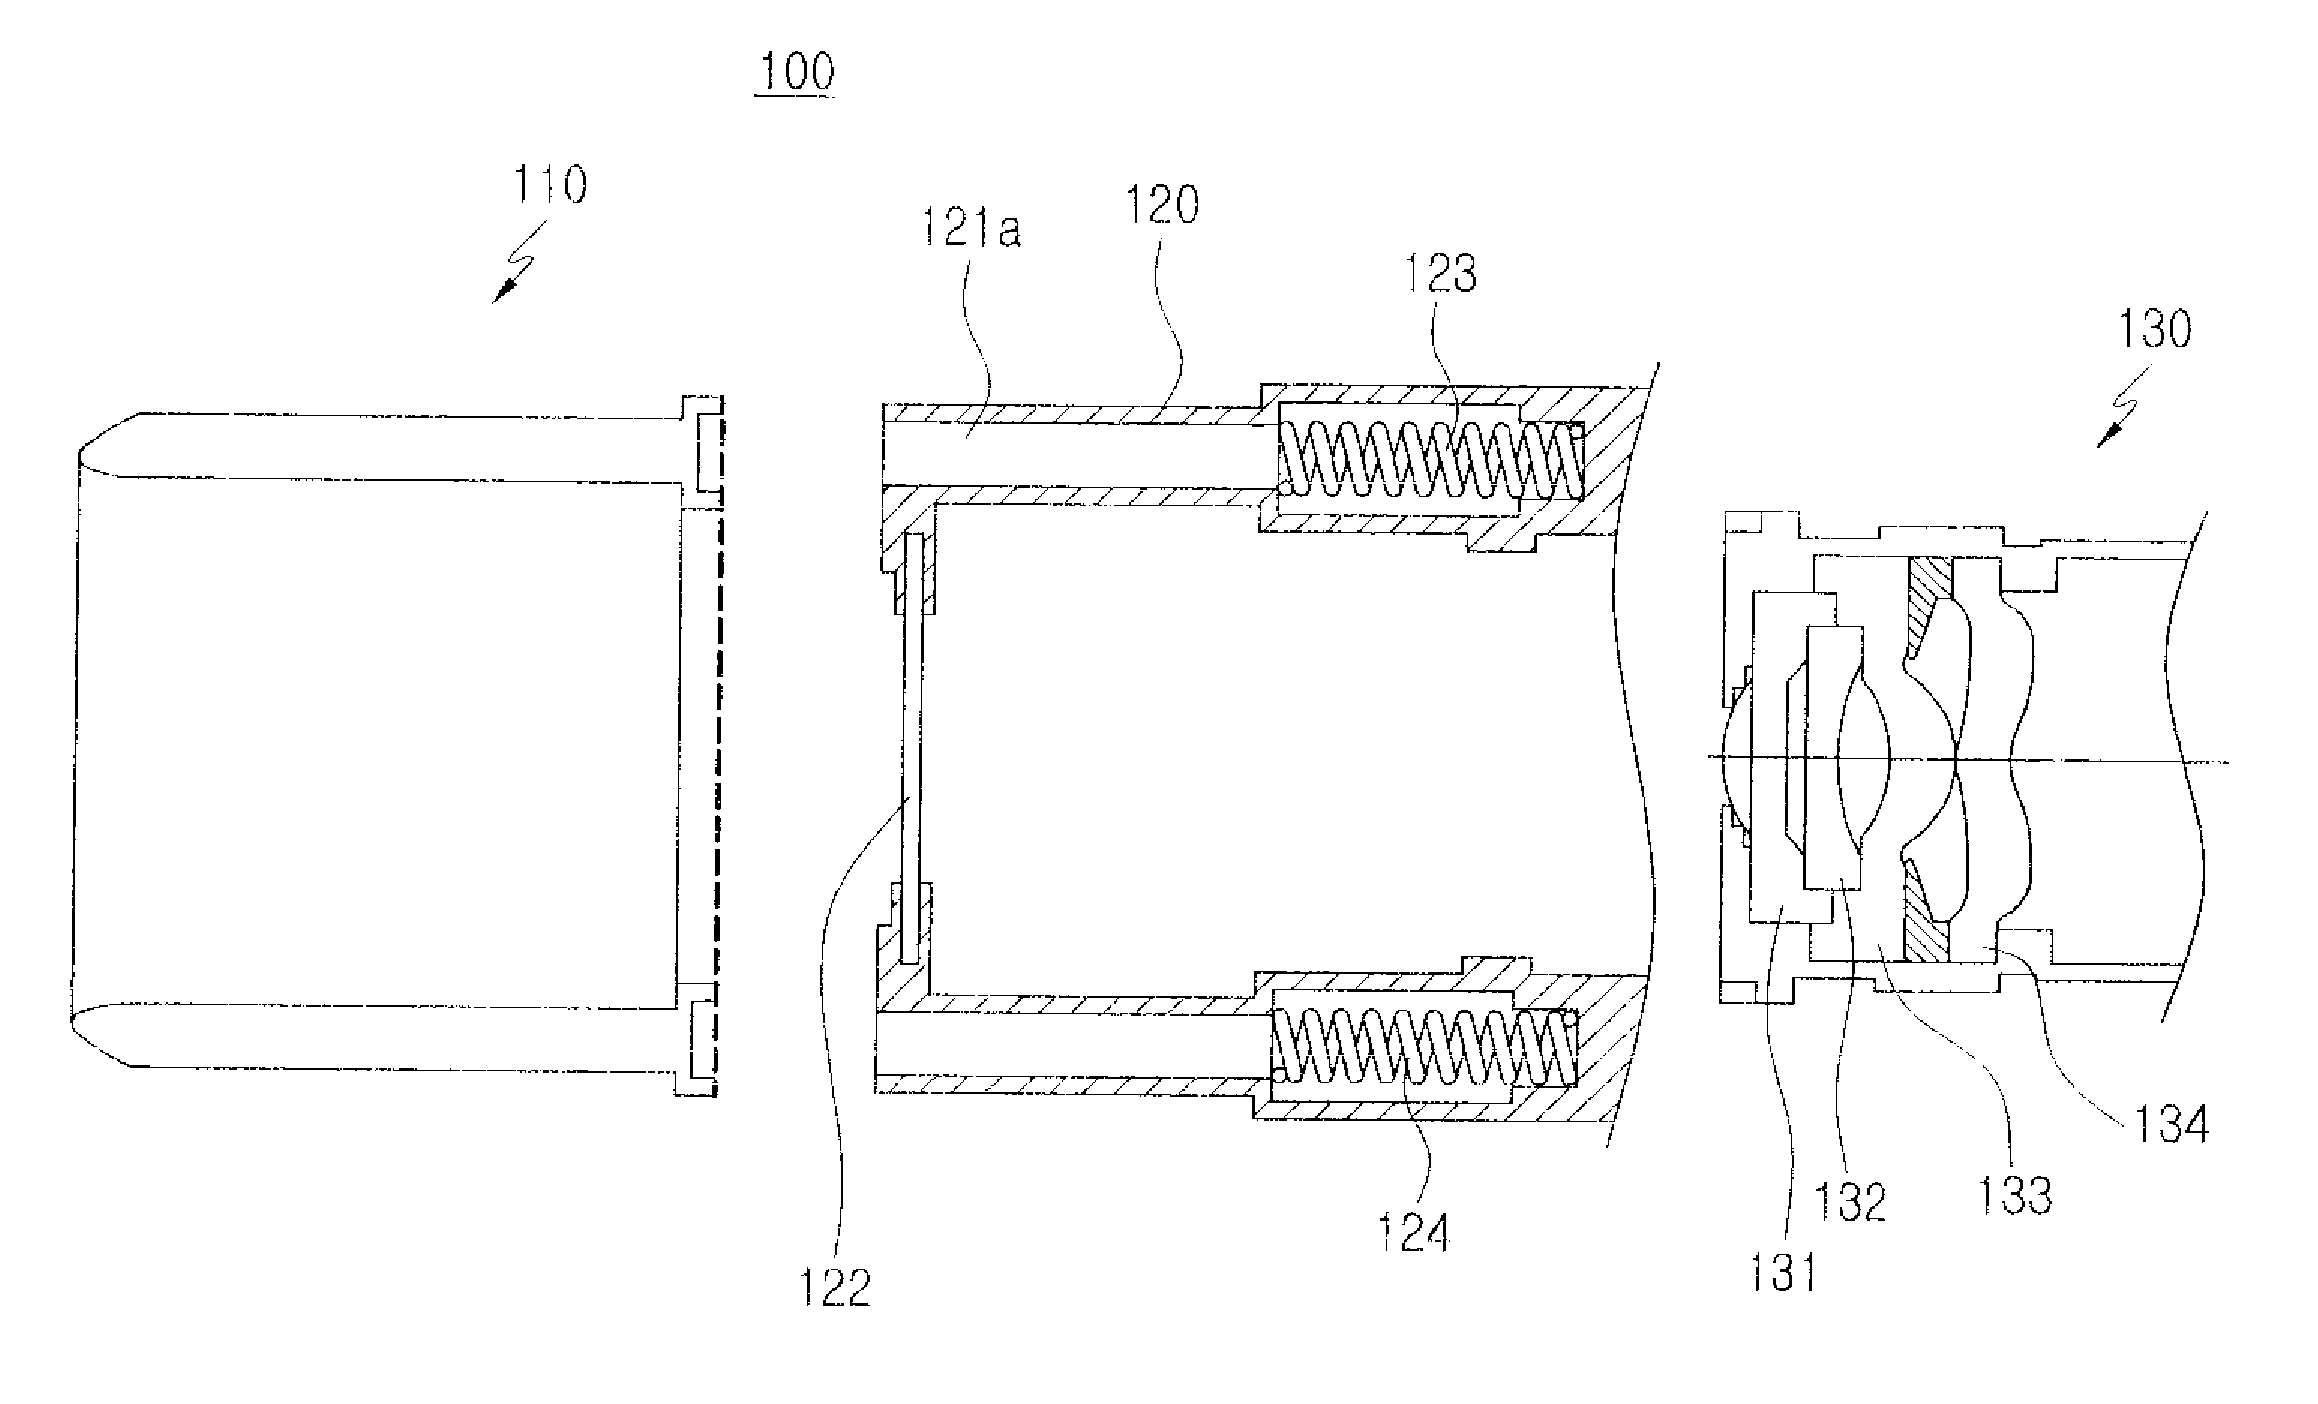 Camera and portable electronic device using the same